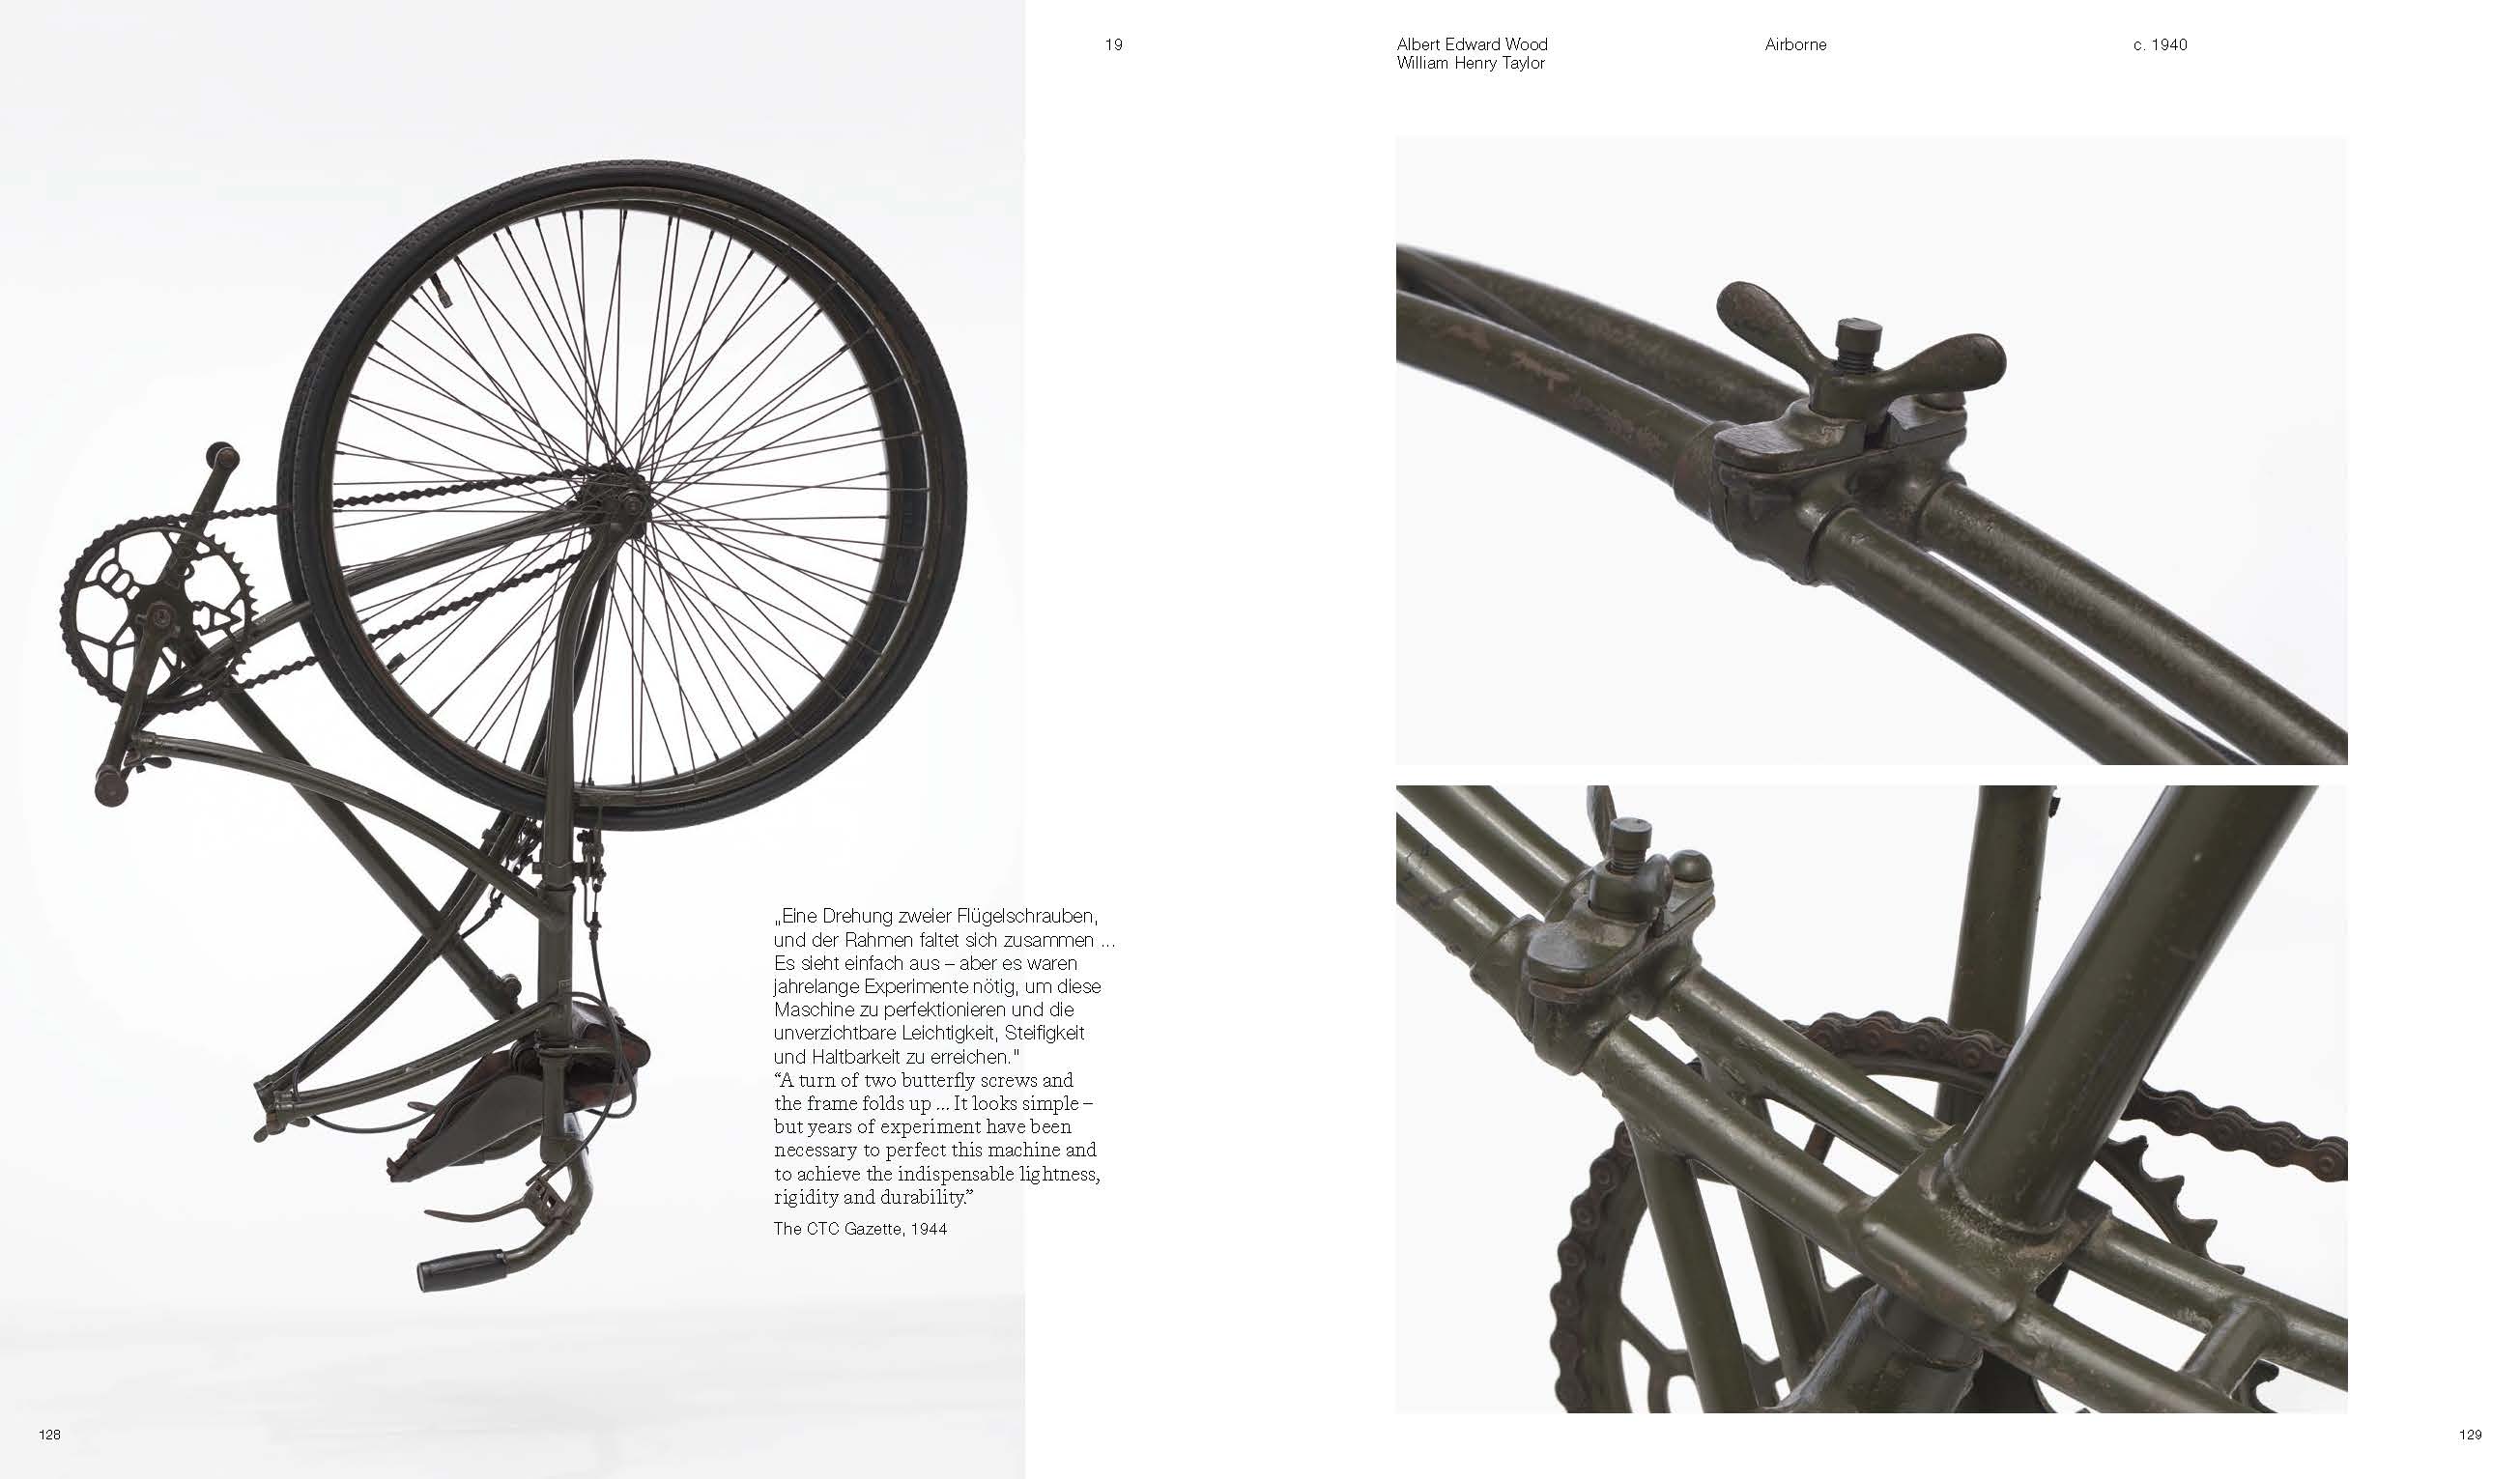 Cult Object - Design Object - Bicycle